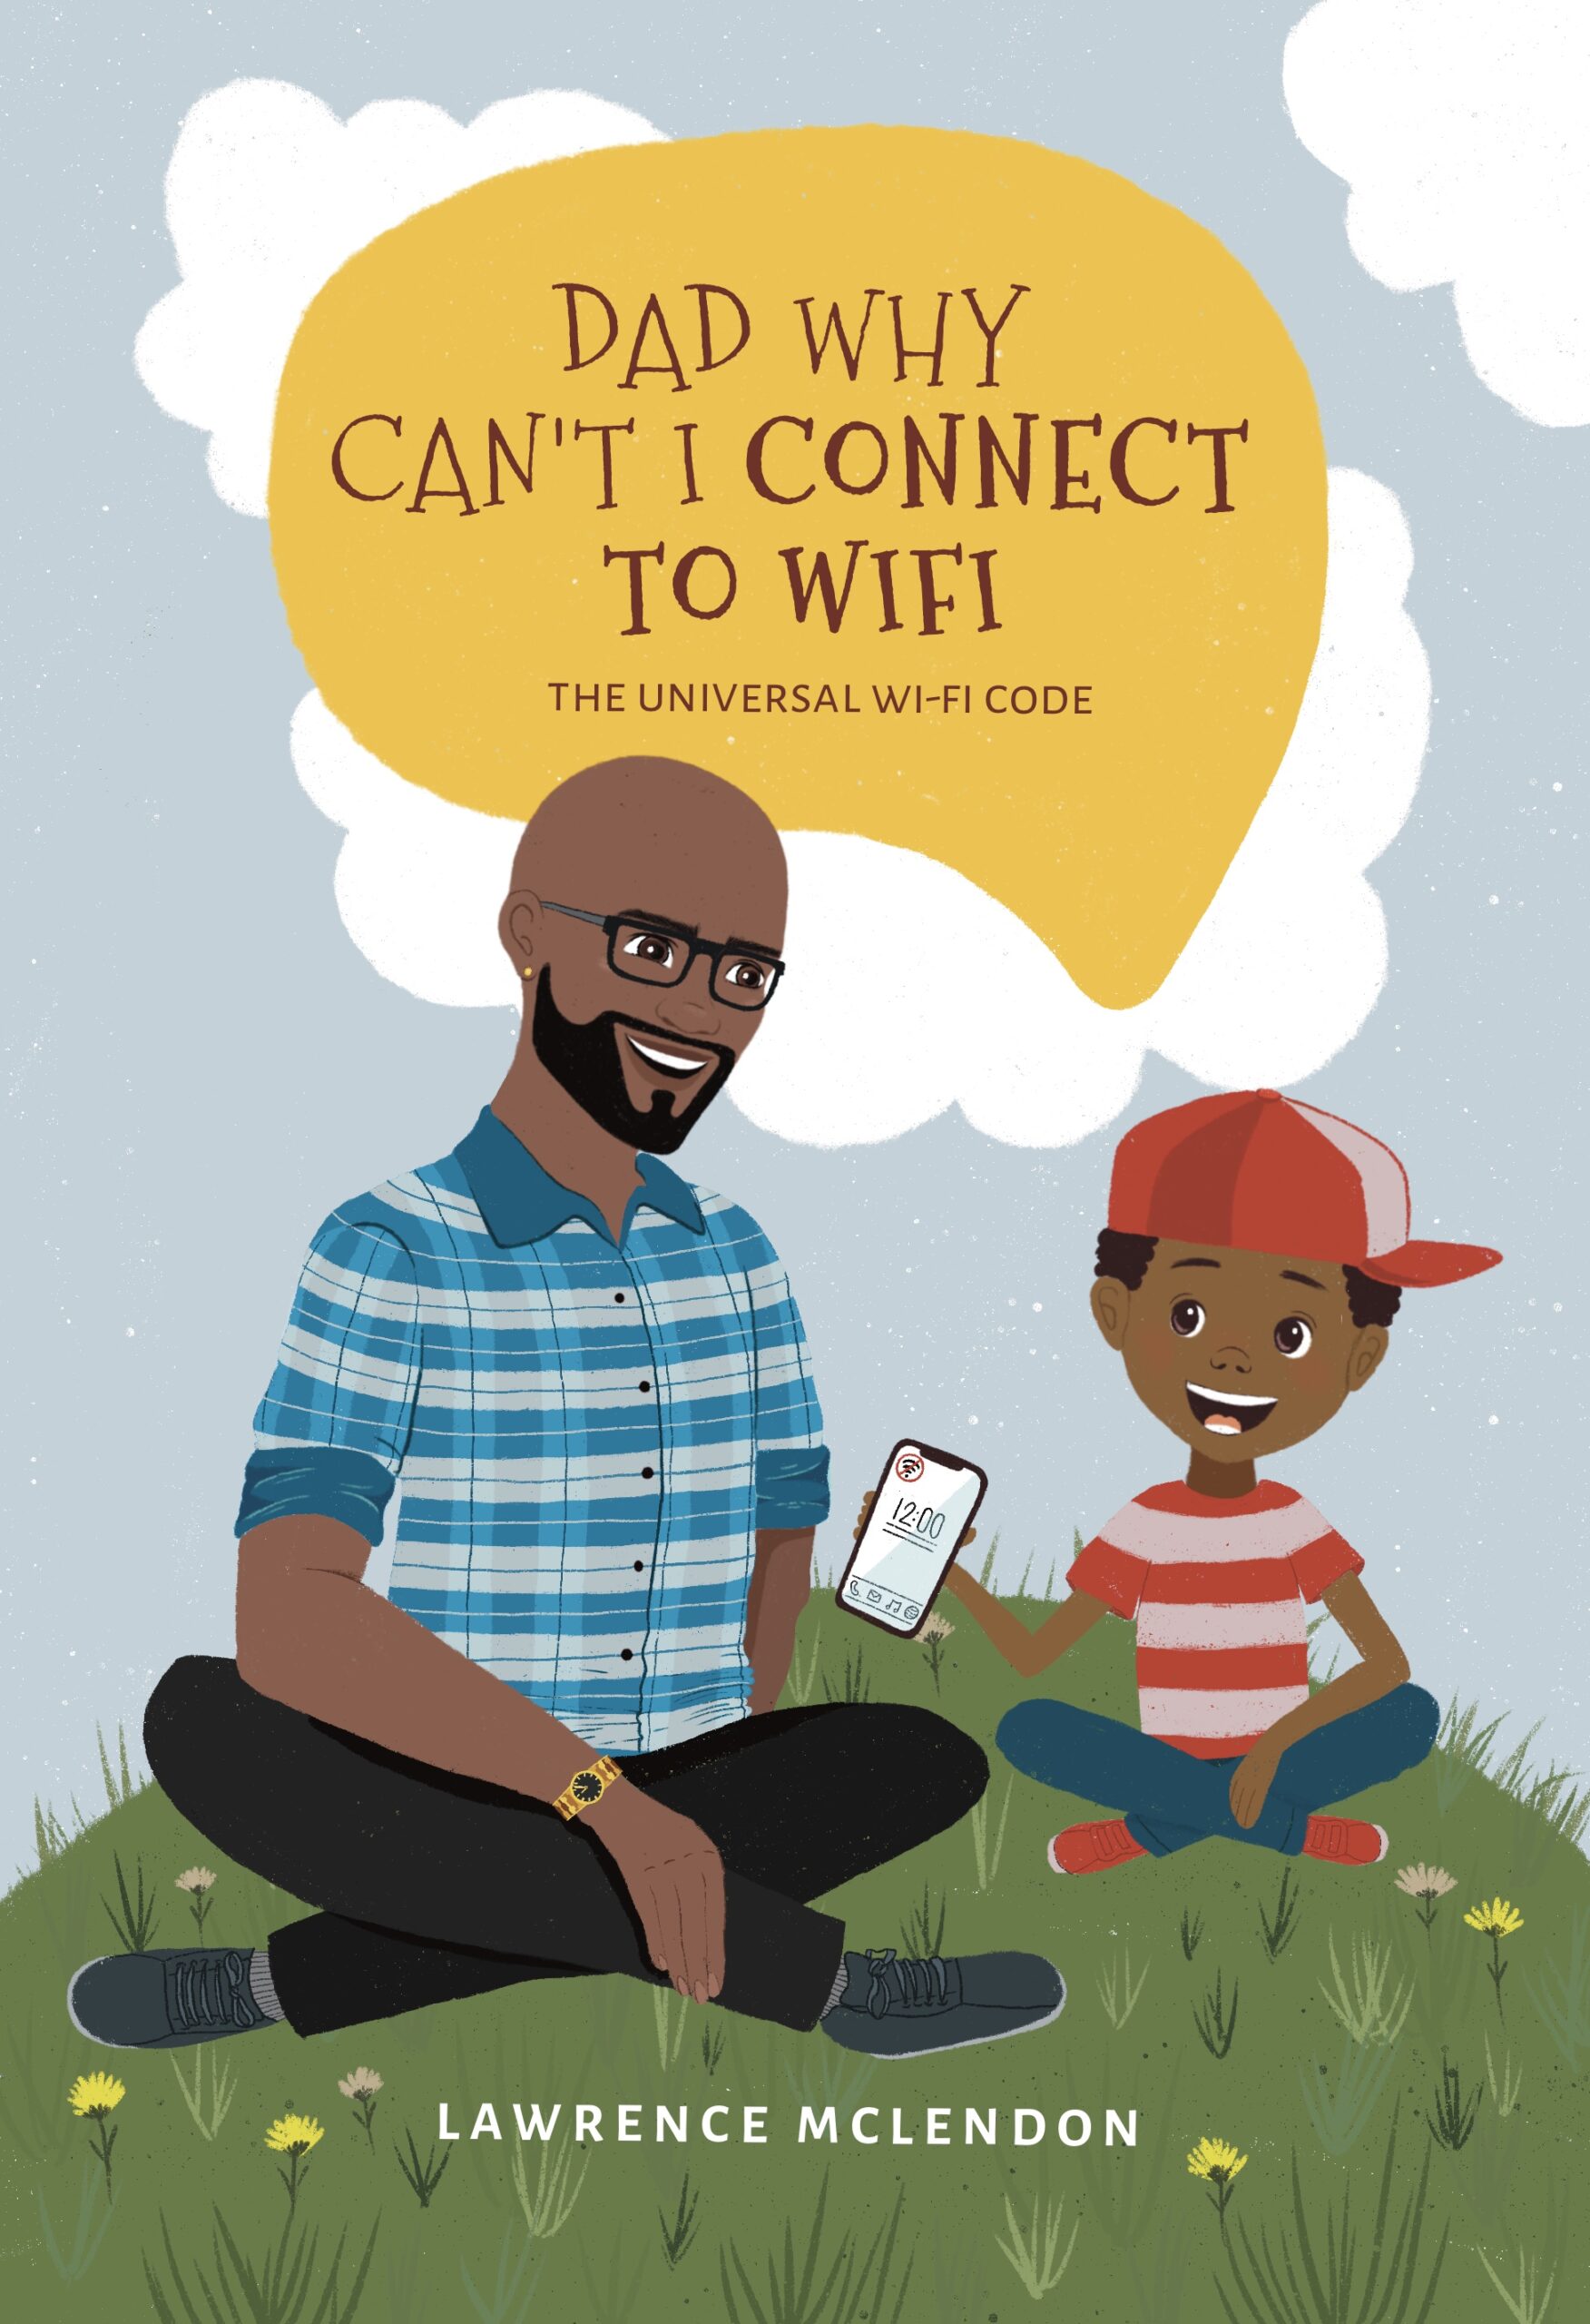 FREE: Dad why can’t I connect to Wi-Fi by Lawrence Mclendon